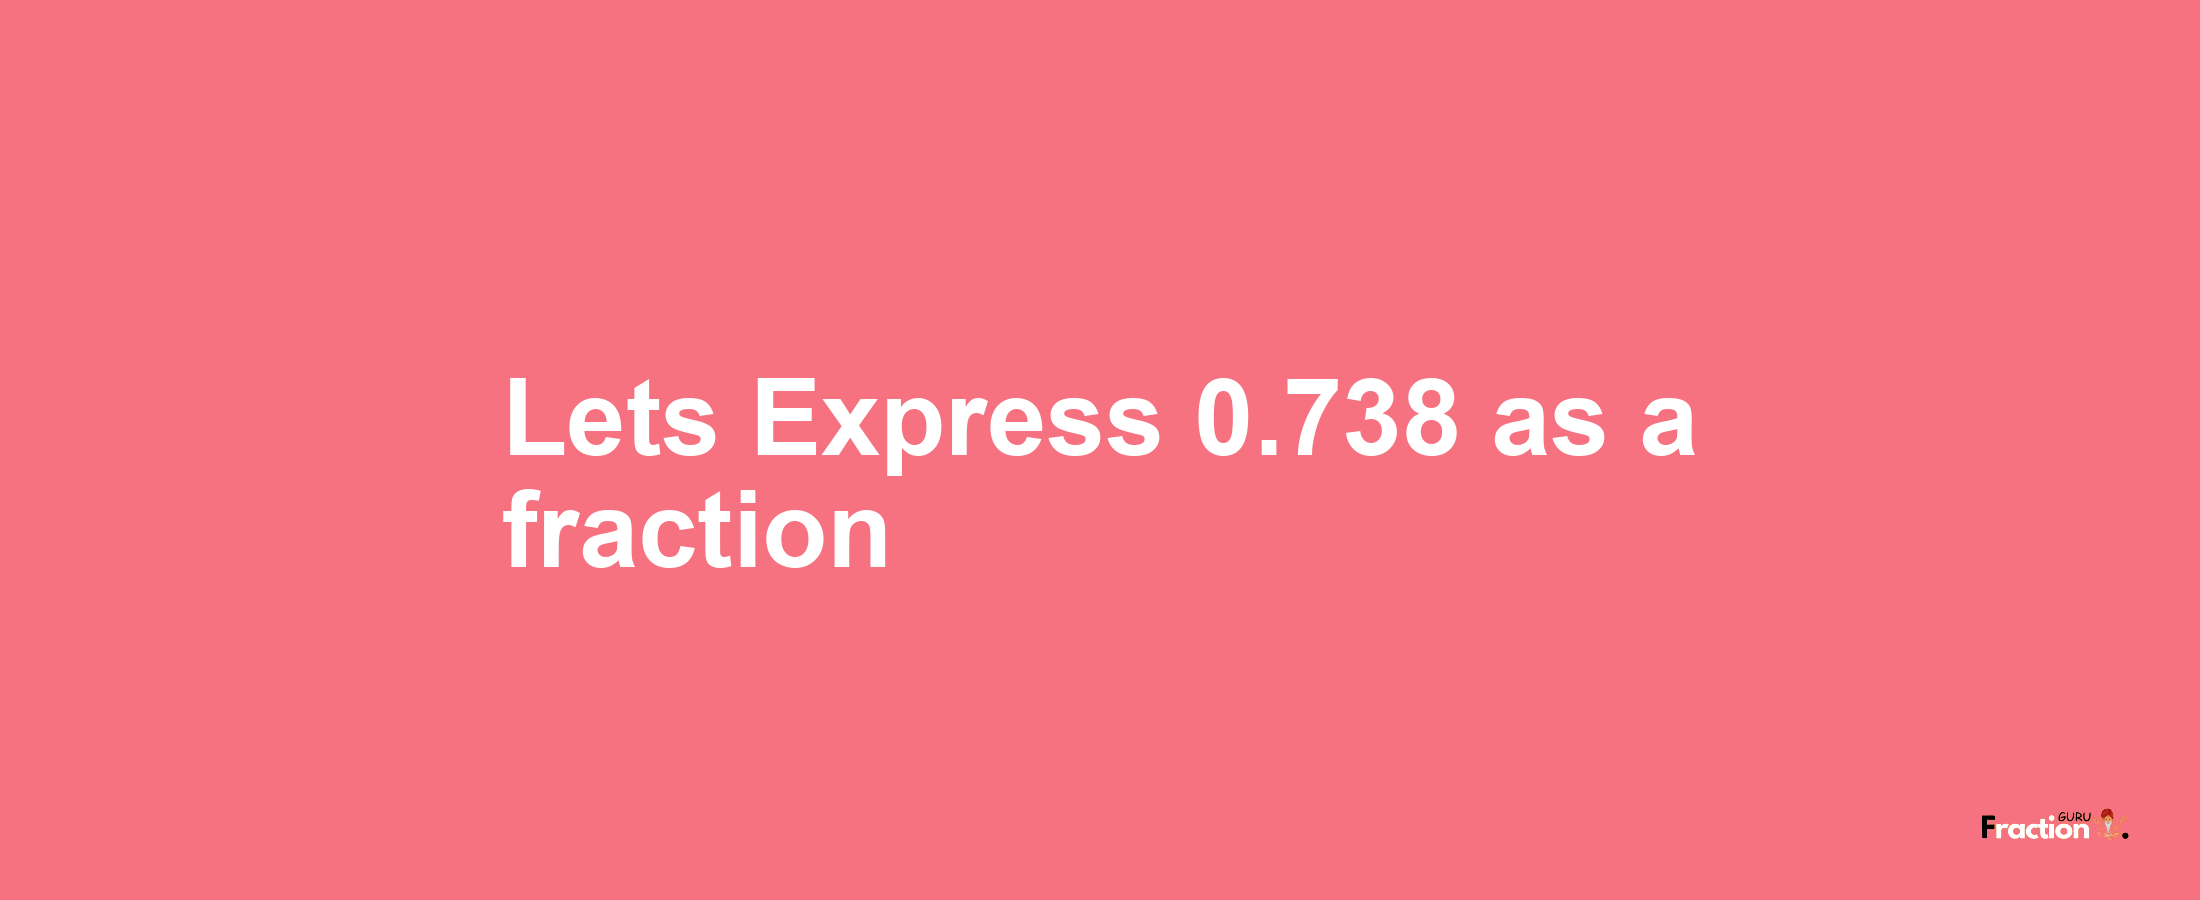 Lets Express 0.738 as afraction